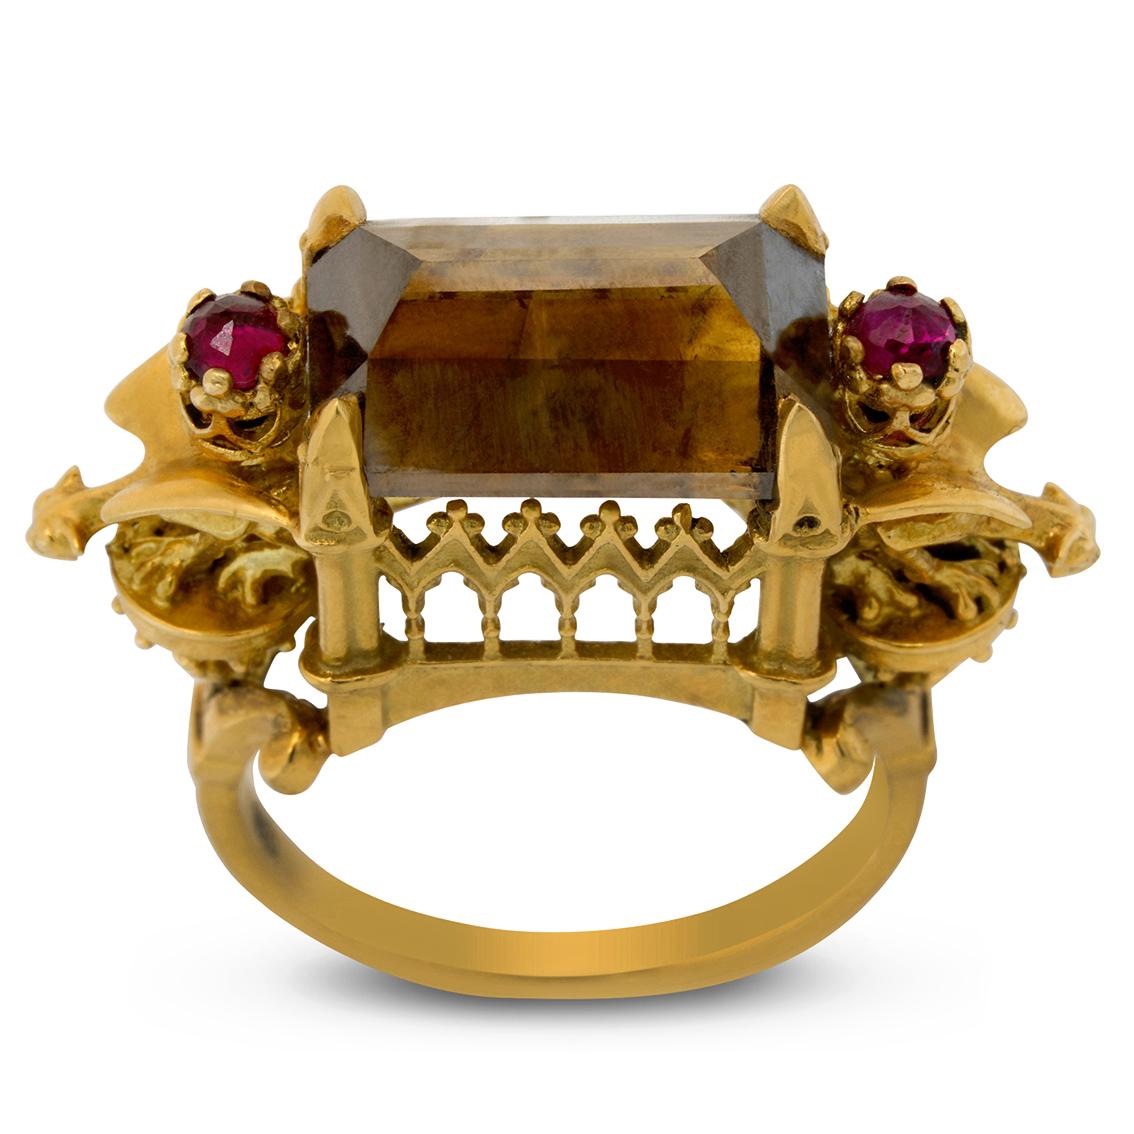 The Ritual Ring is a unique piece and would make the perfect engagement ring for the unusual bride. This is one of William's signature cathedral rings, inspired by gothic architecture throughout Europe. This one features hand sculpted gargoyles much